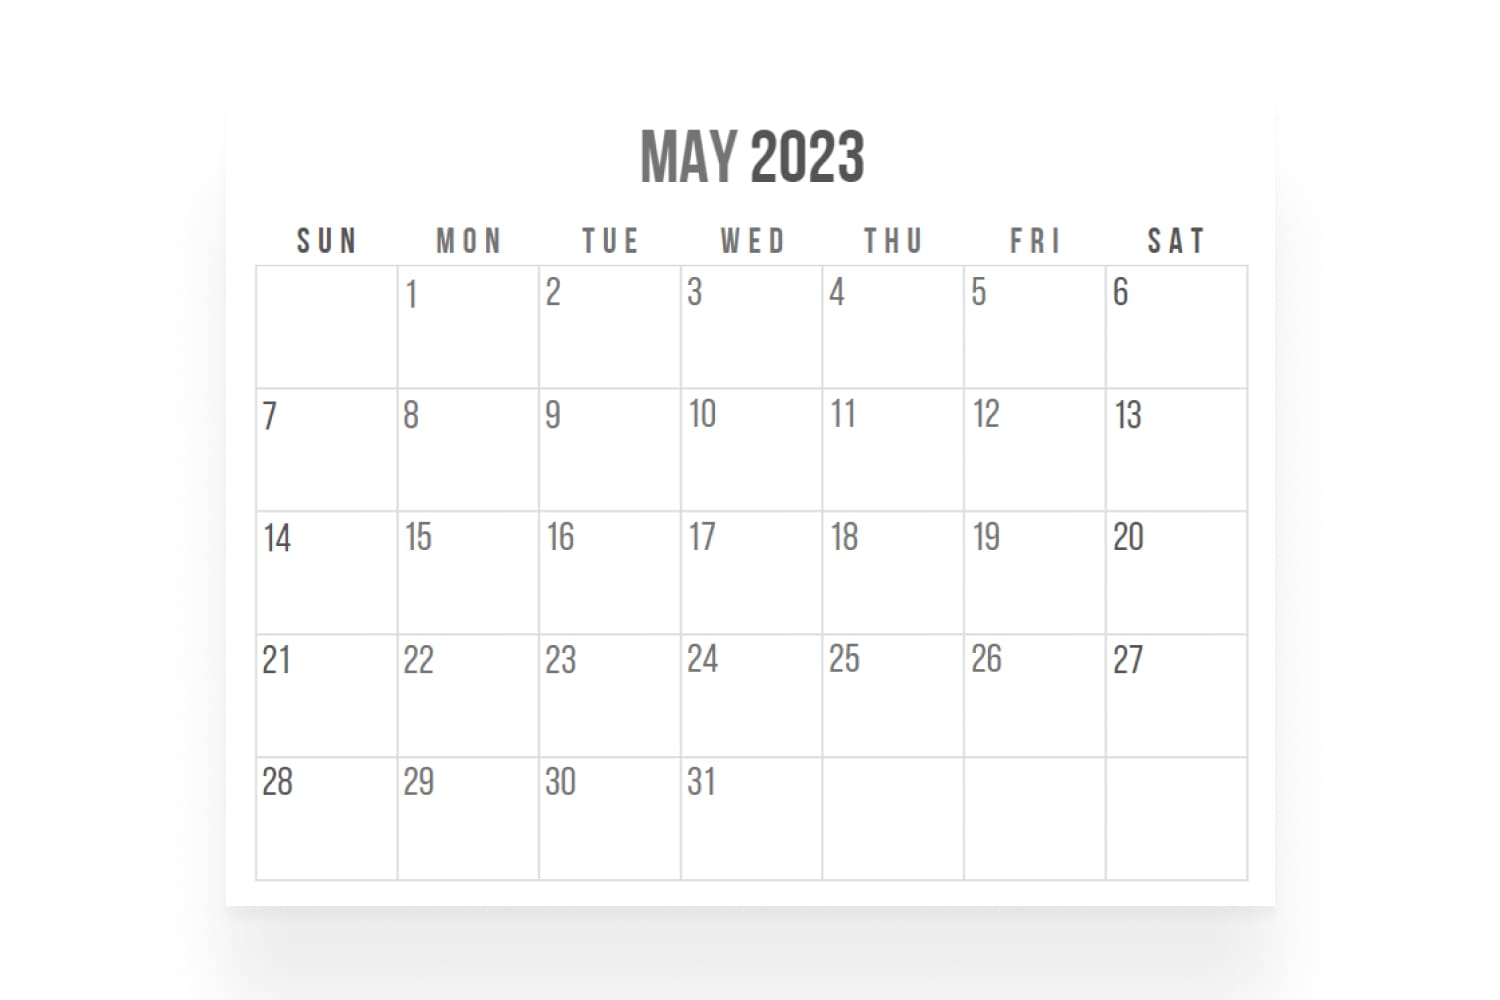 May calendar with white and gray color scheme, clean typography, and ample space for notes.